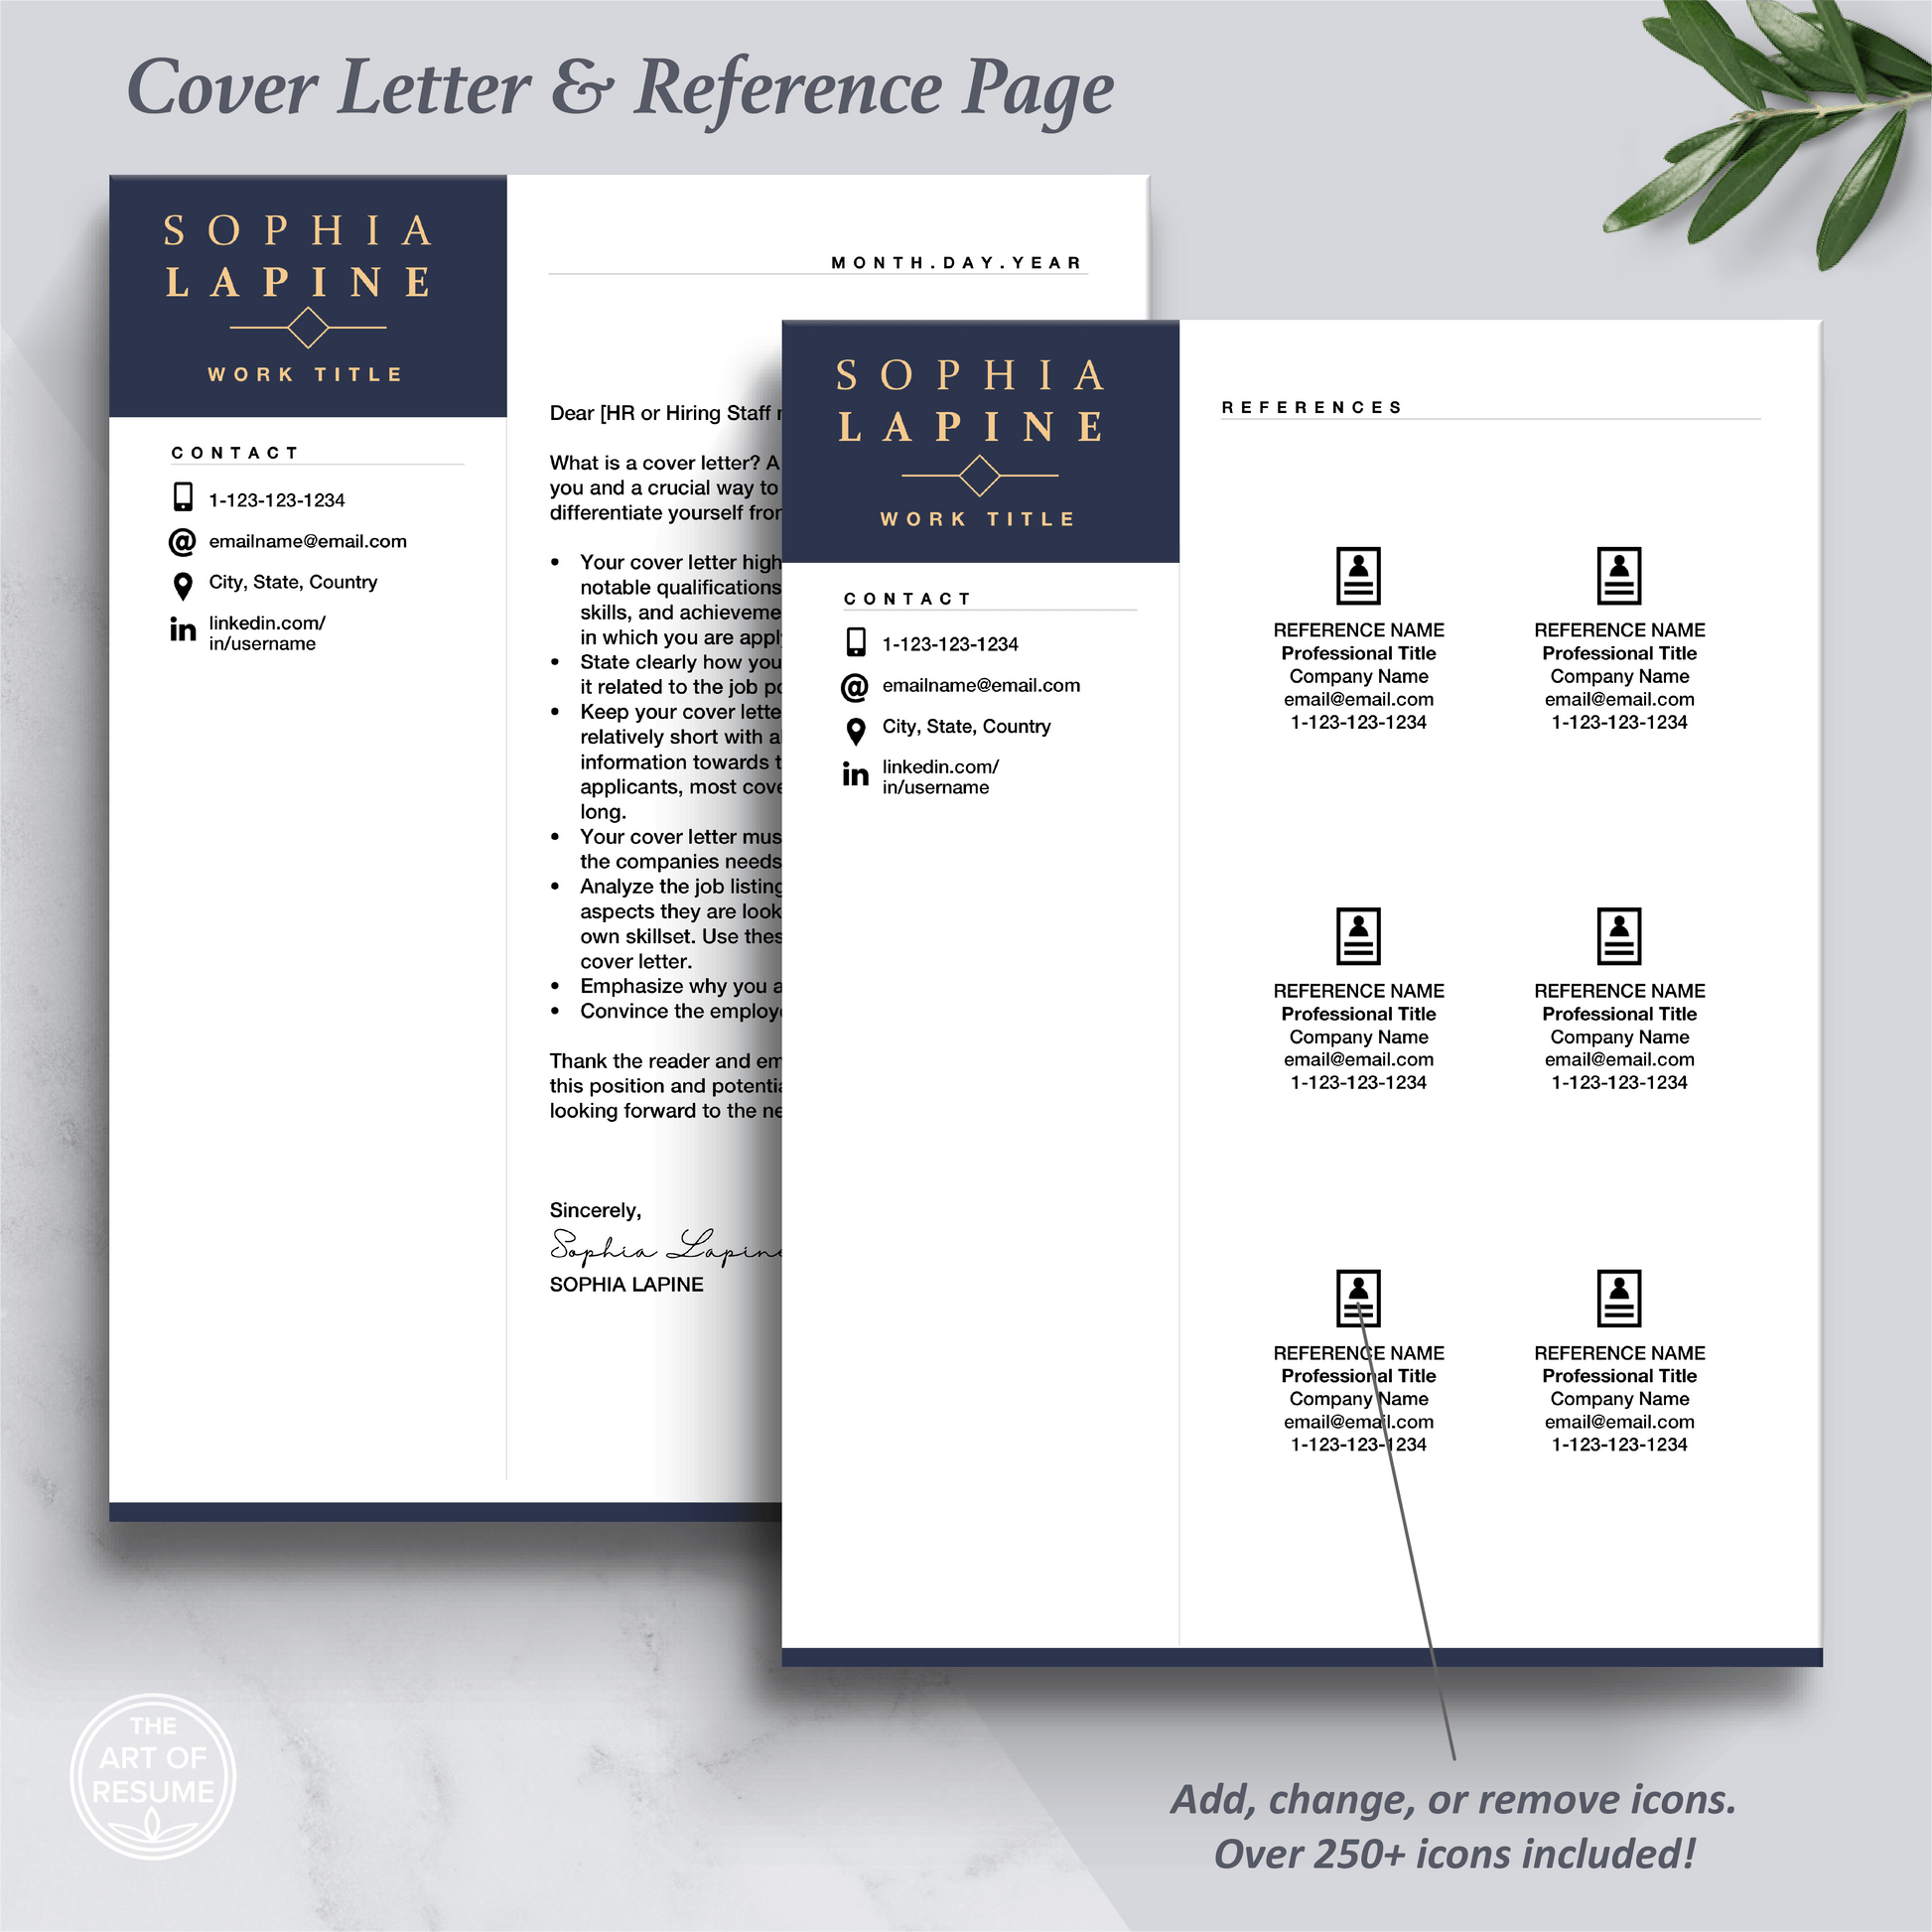 The Art of Resume Templates | Professional Navy Blue Cover Letter and Reference Page Design Templates Instant Download